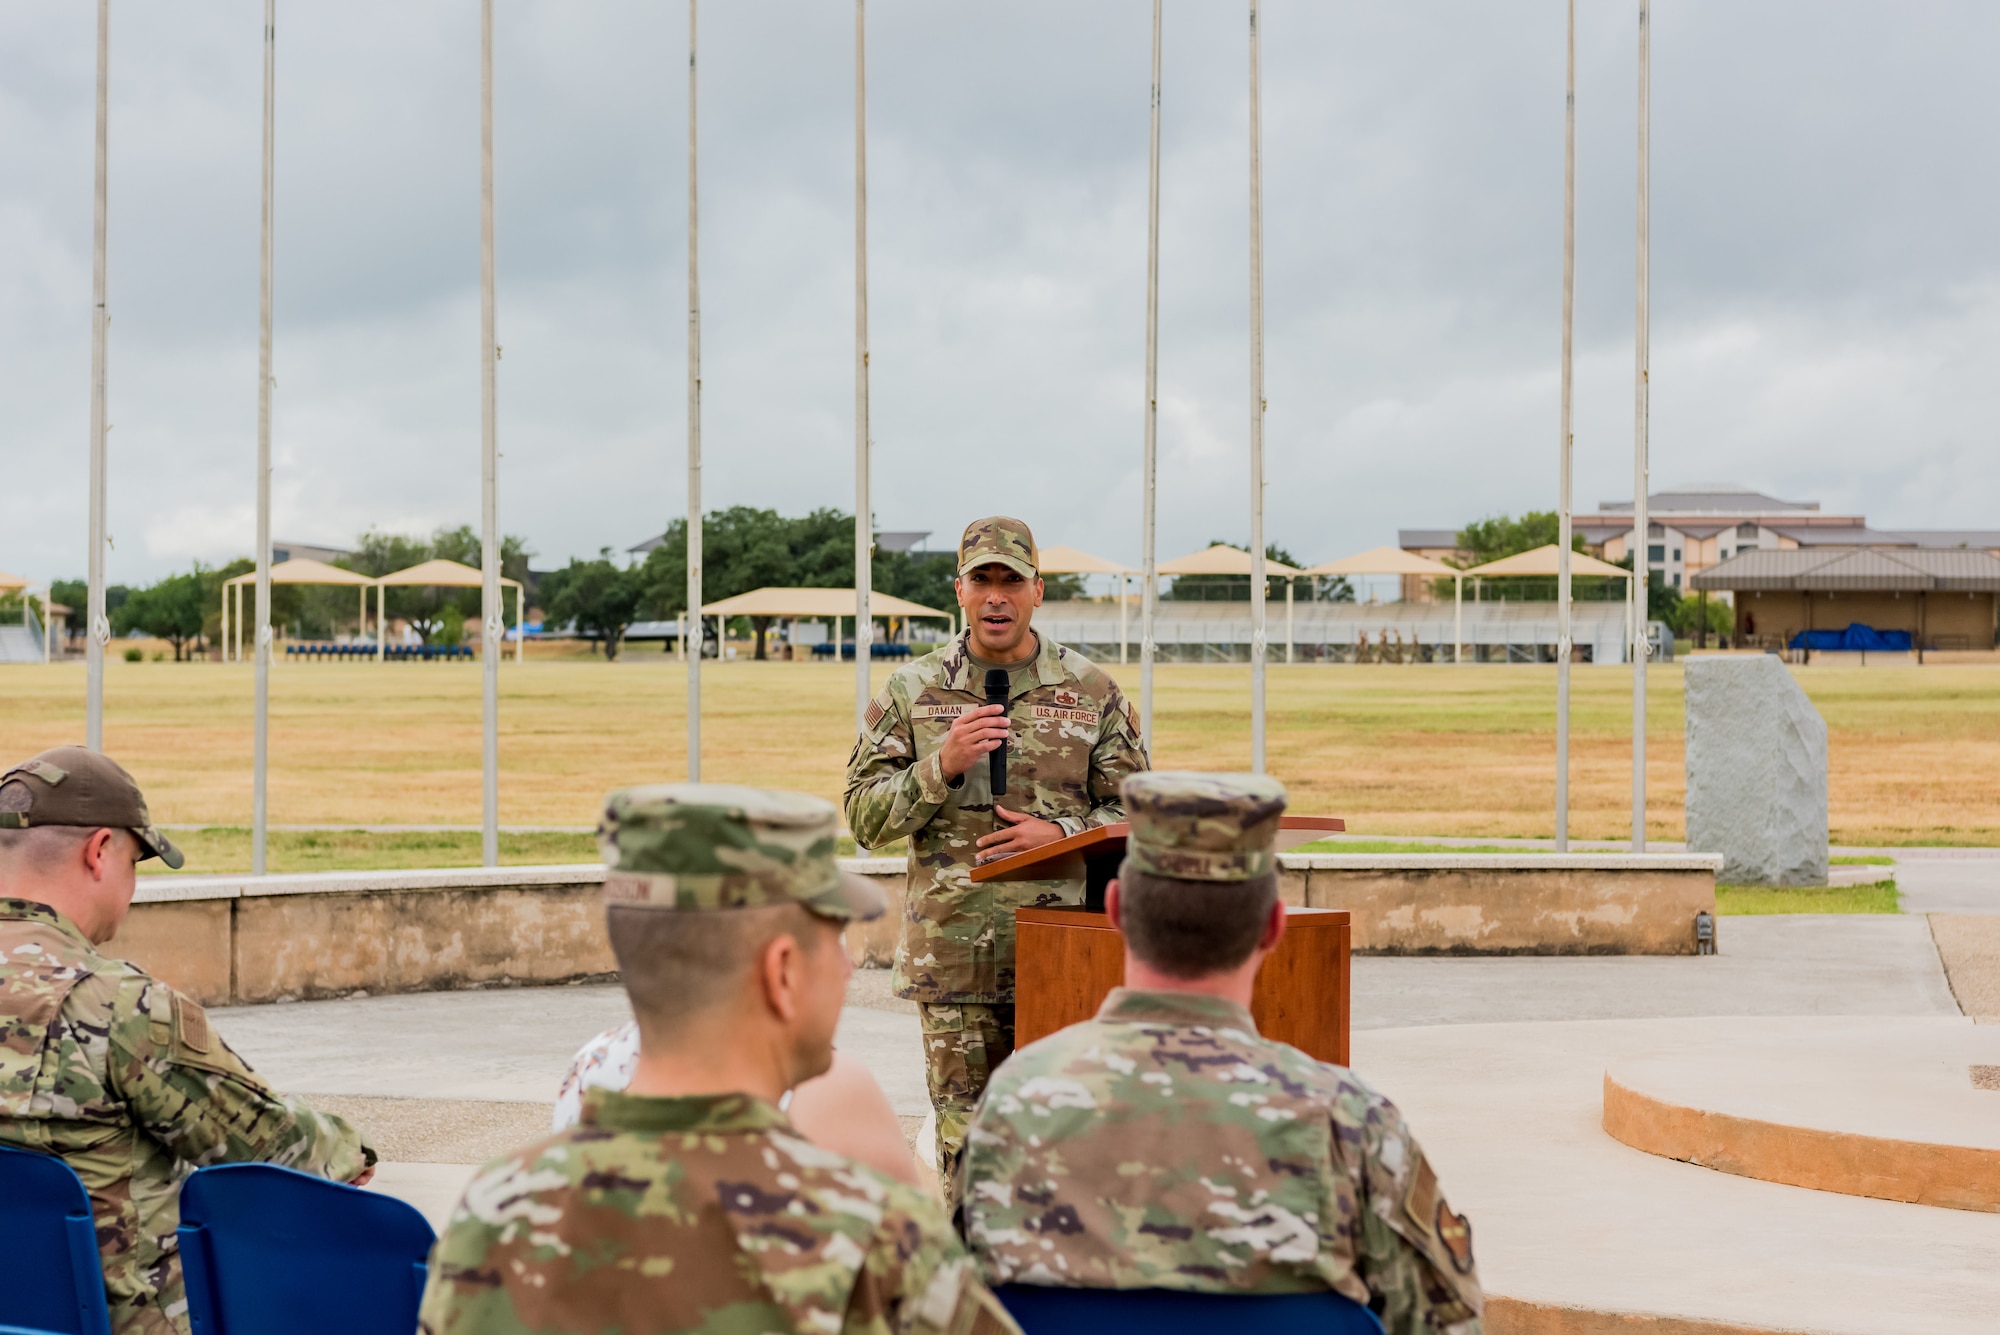 Chief Master Sgt. Carlos F. Damian, 37th Training Wing Command Chief